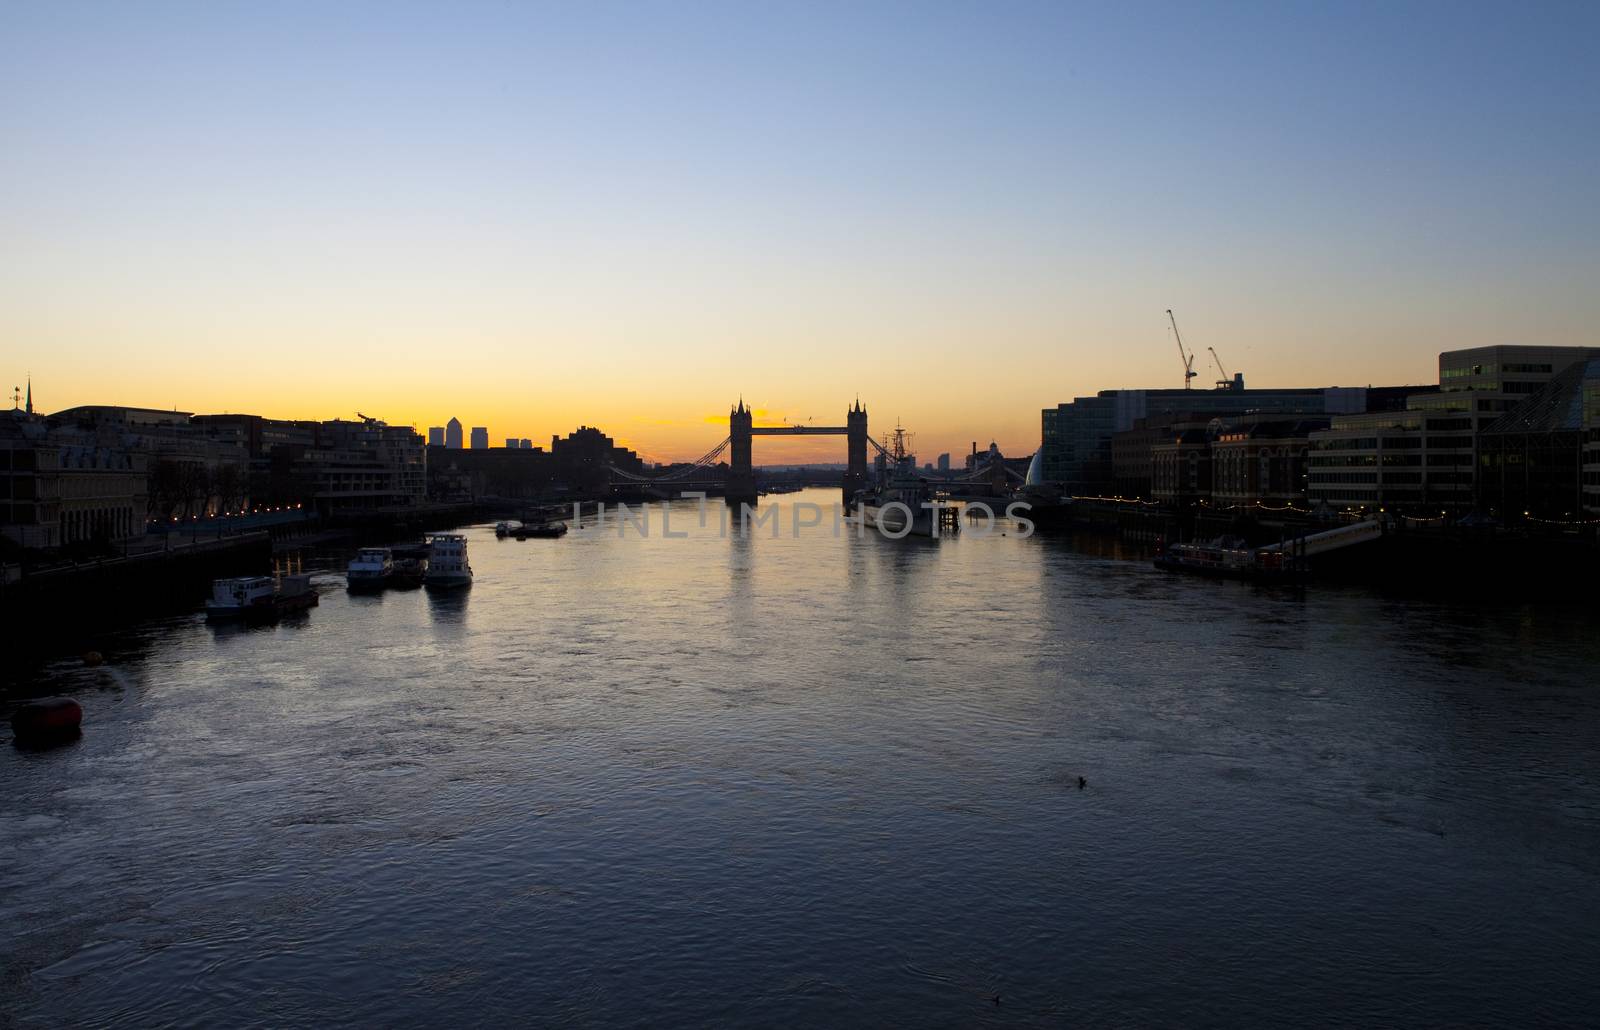 The beautiful sunrise behind Tower Bridge in London.  HMS Belfast, City Hall and the skyscrapers in Docklands are also visible.